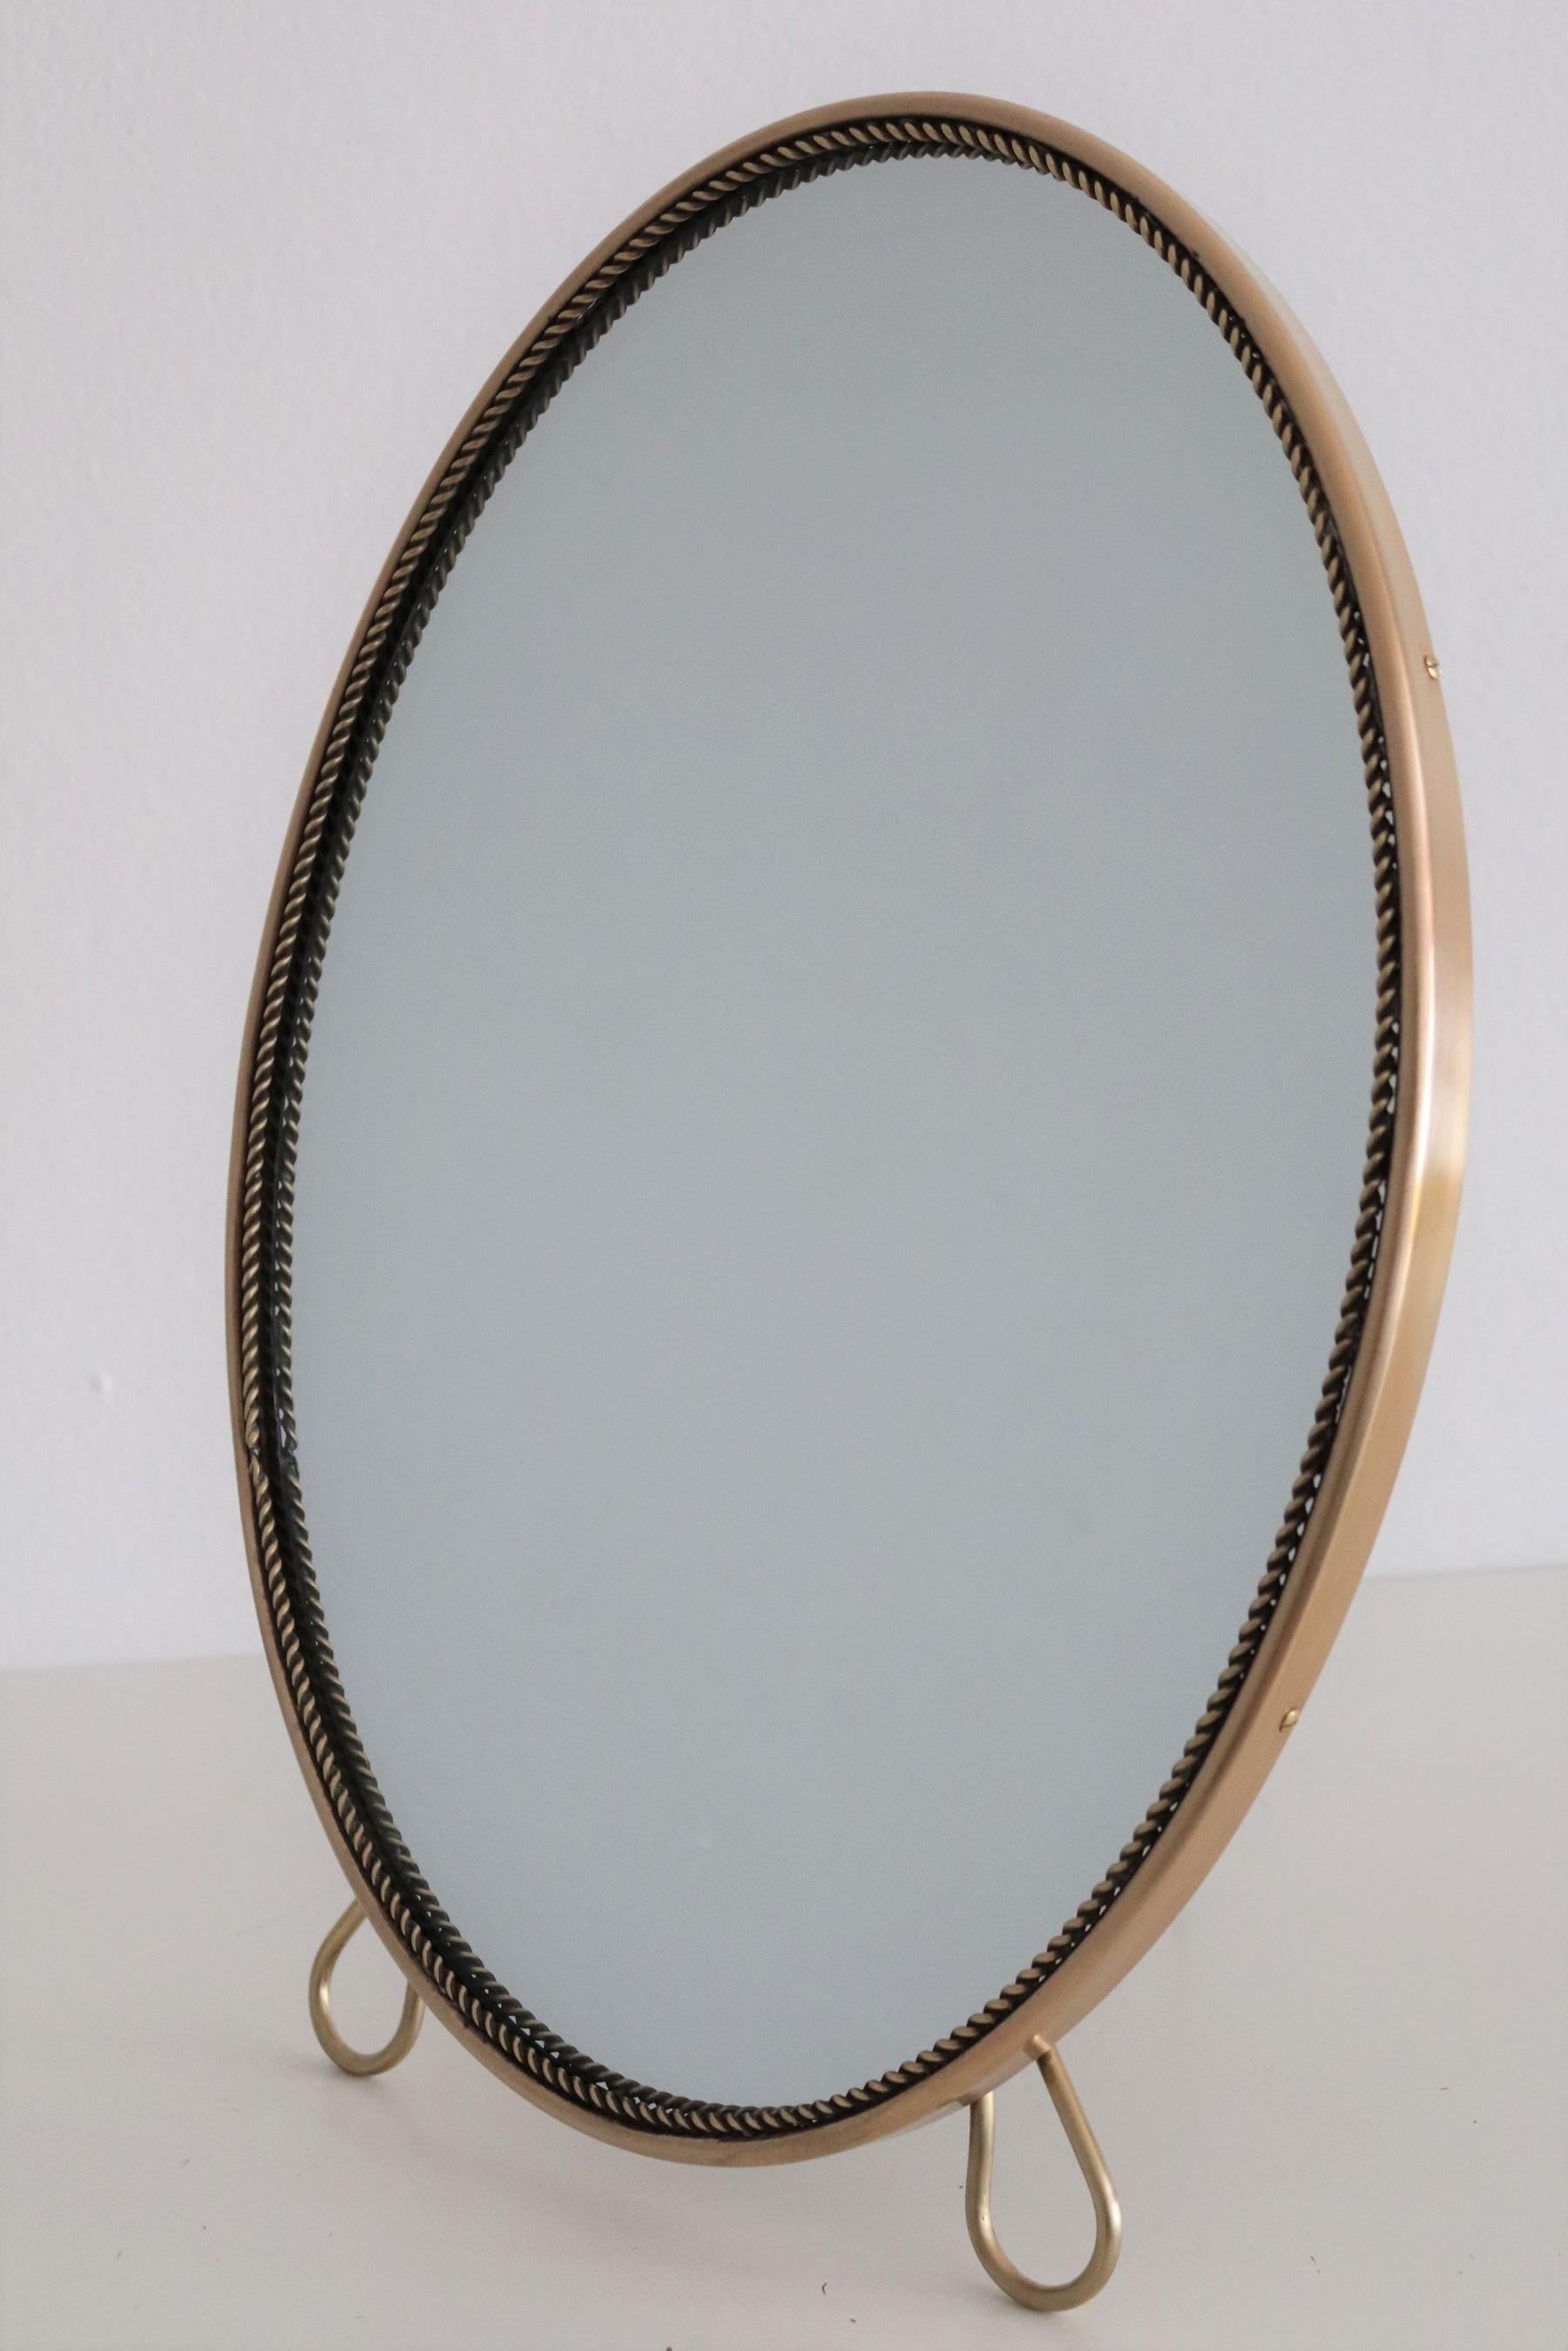 Gorgeous table or vanity mirror with full brass frame and stand.
Made in Italy in the 1950s.
The round frame has decorative details also in brass and the backplate is made of dark wood.
The mirror glass is new therefore in excellent condition.